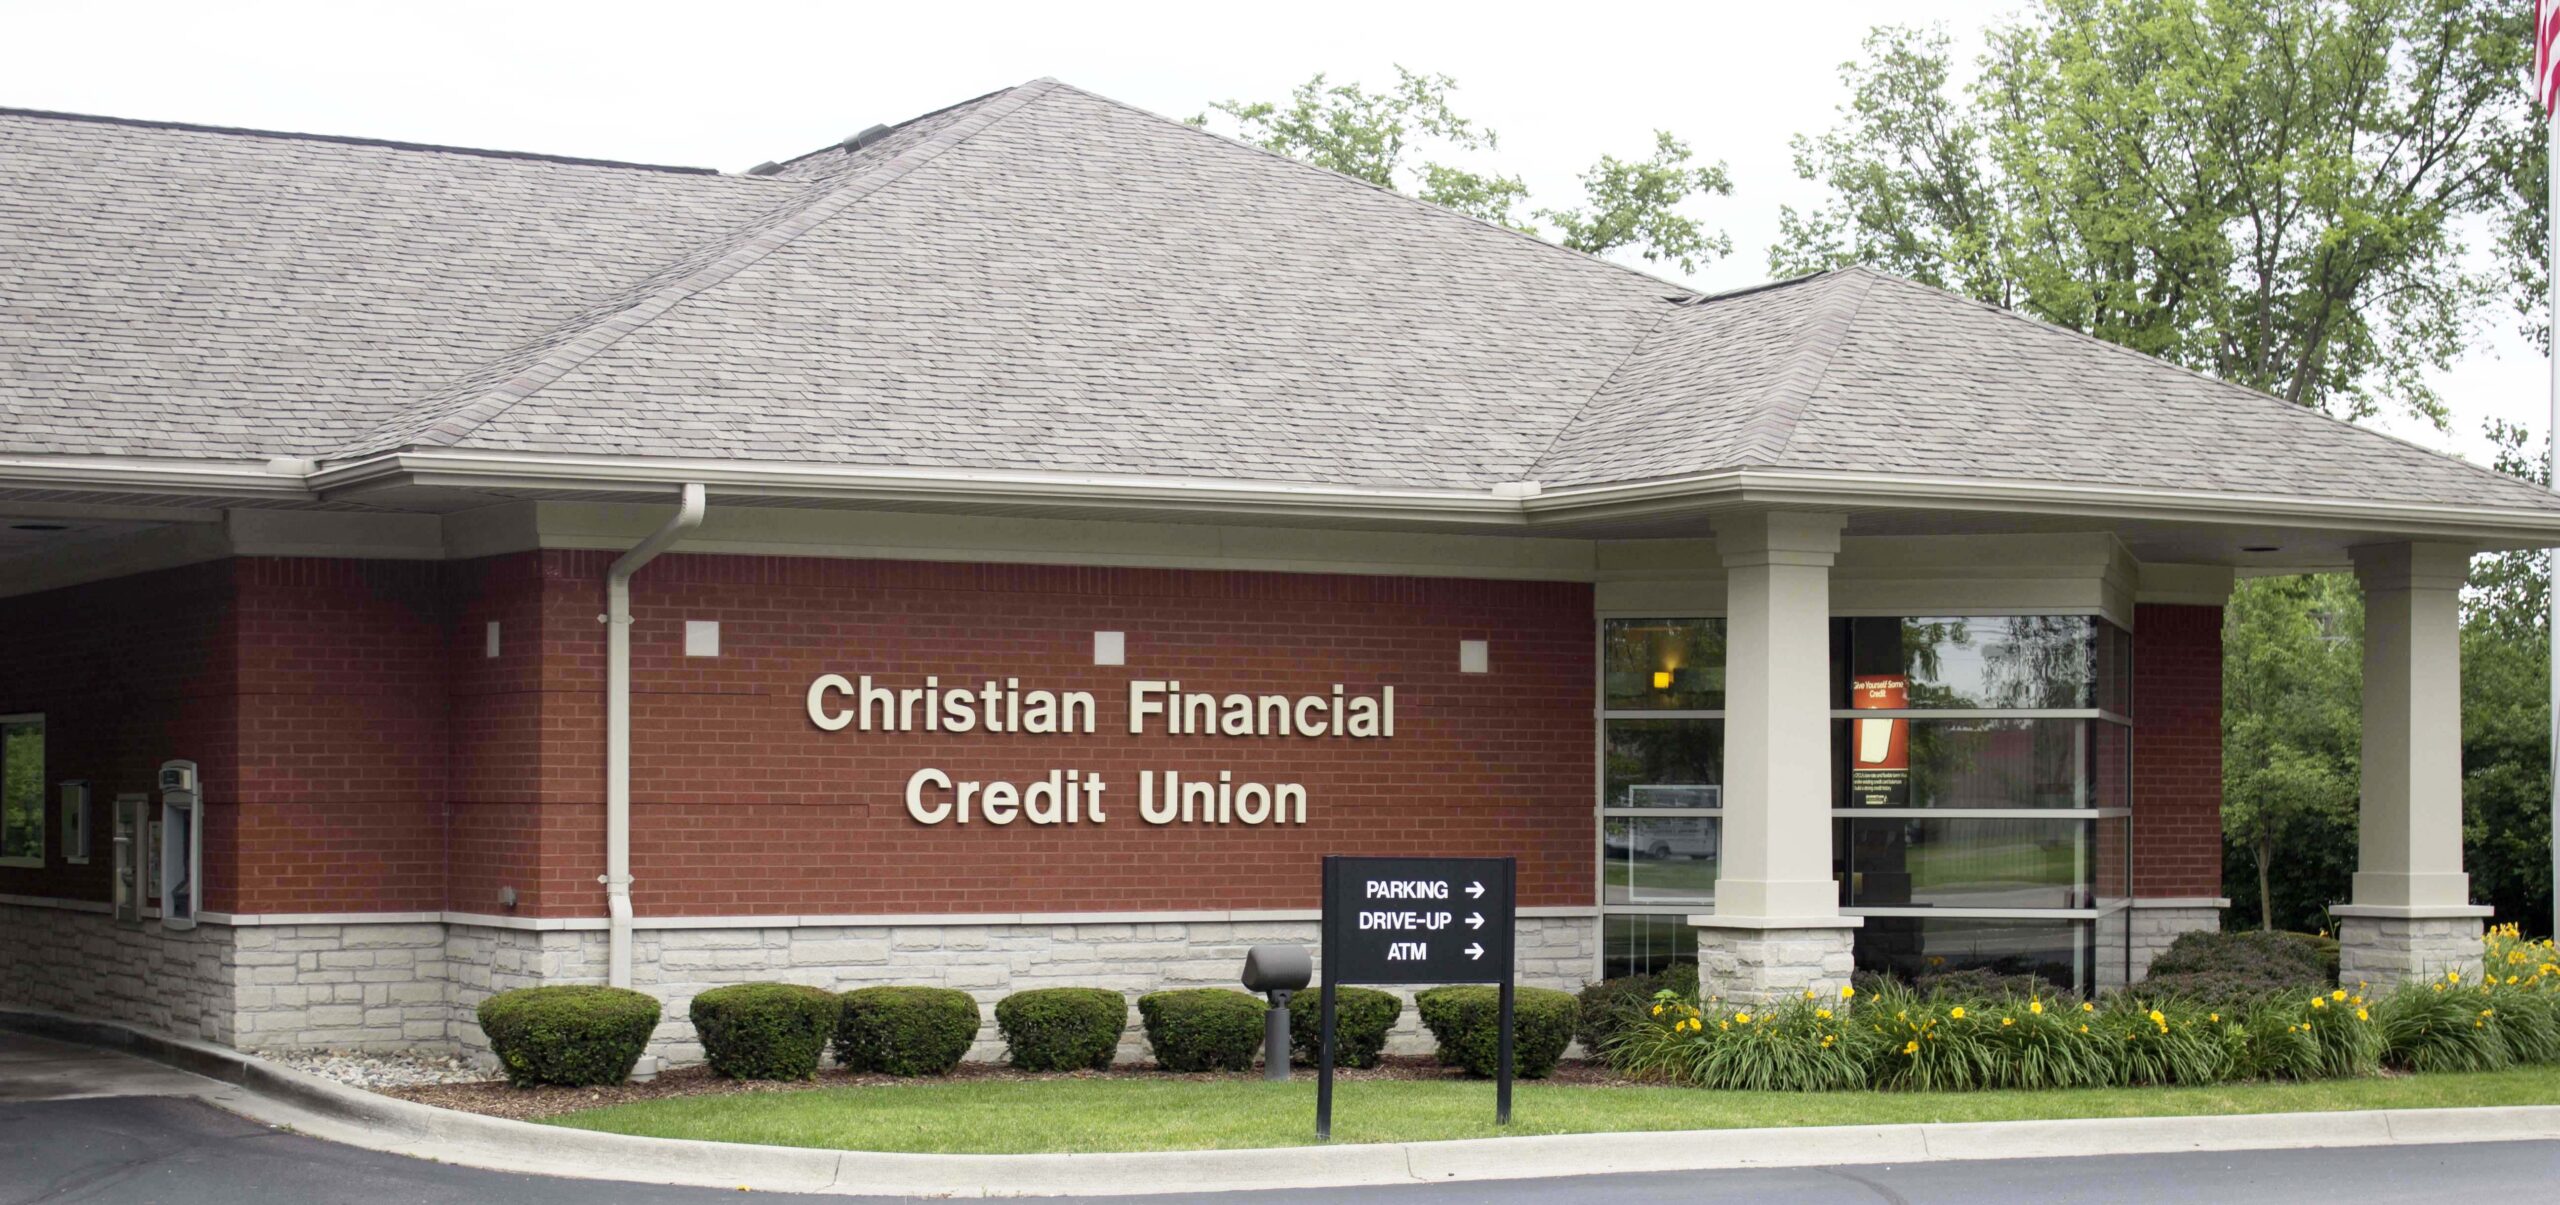 Shelby Township Branch